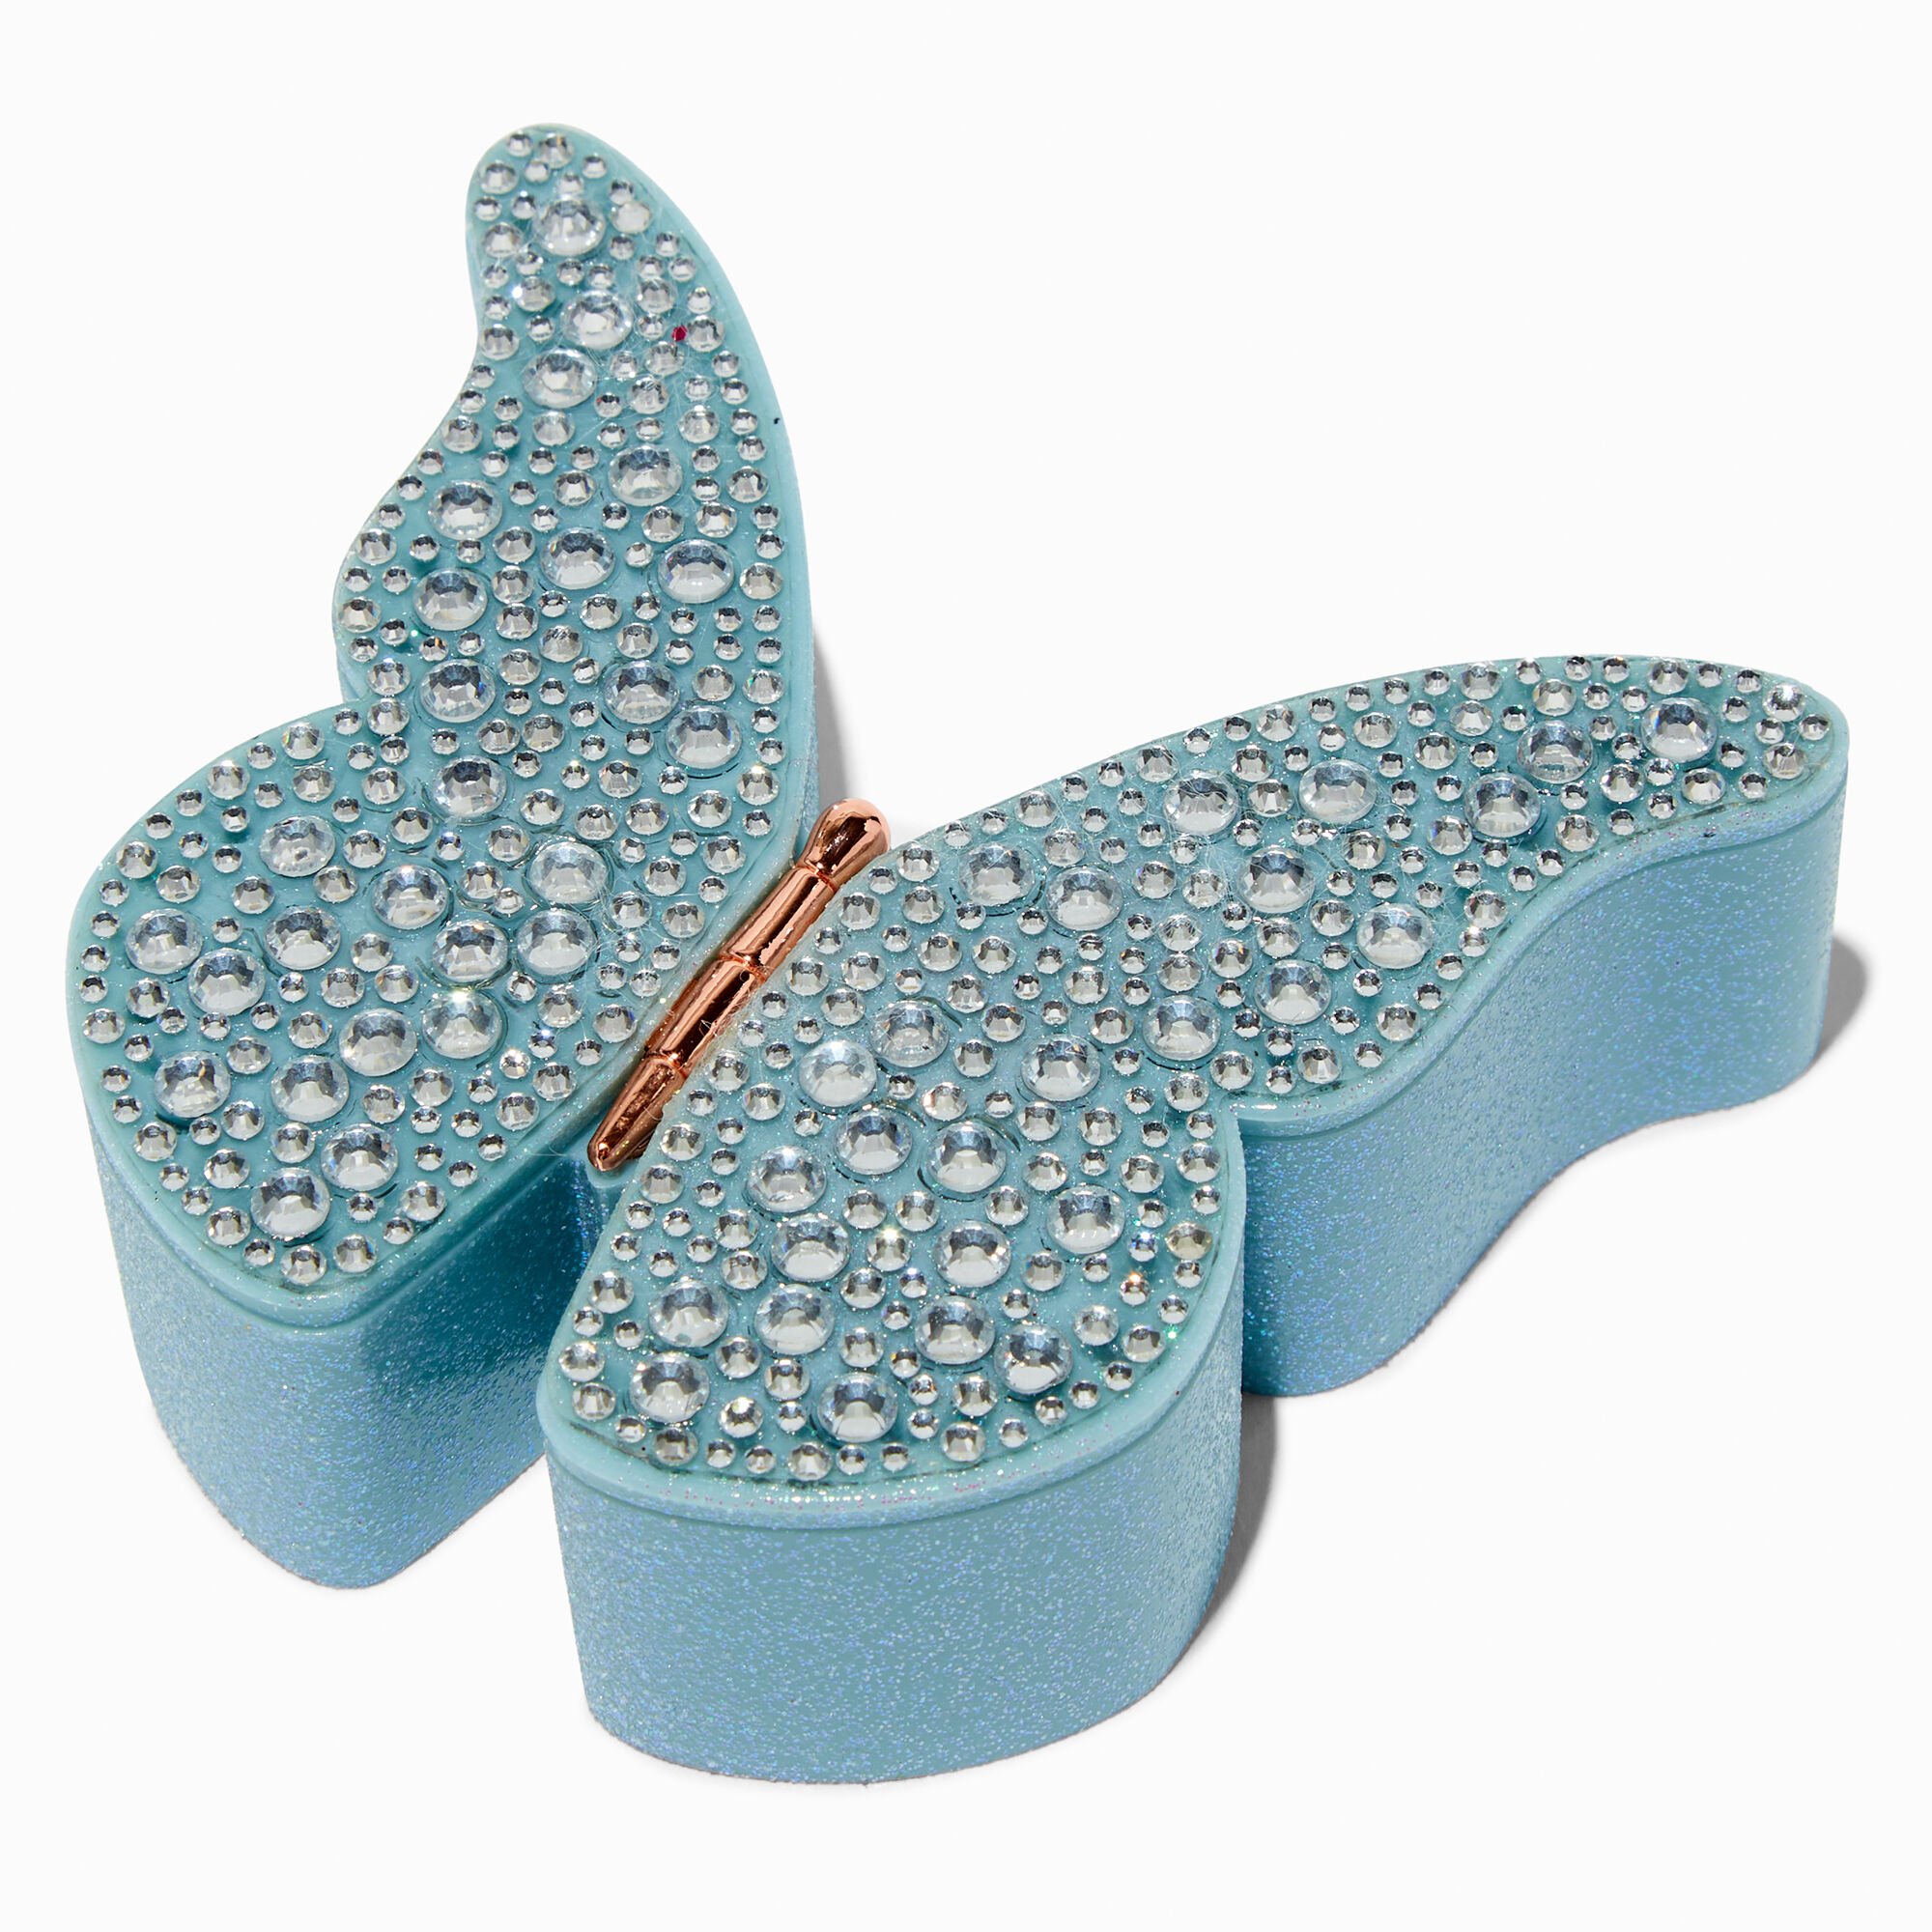 View Claires Embellished Butterfly Hinged Box Blue information